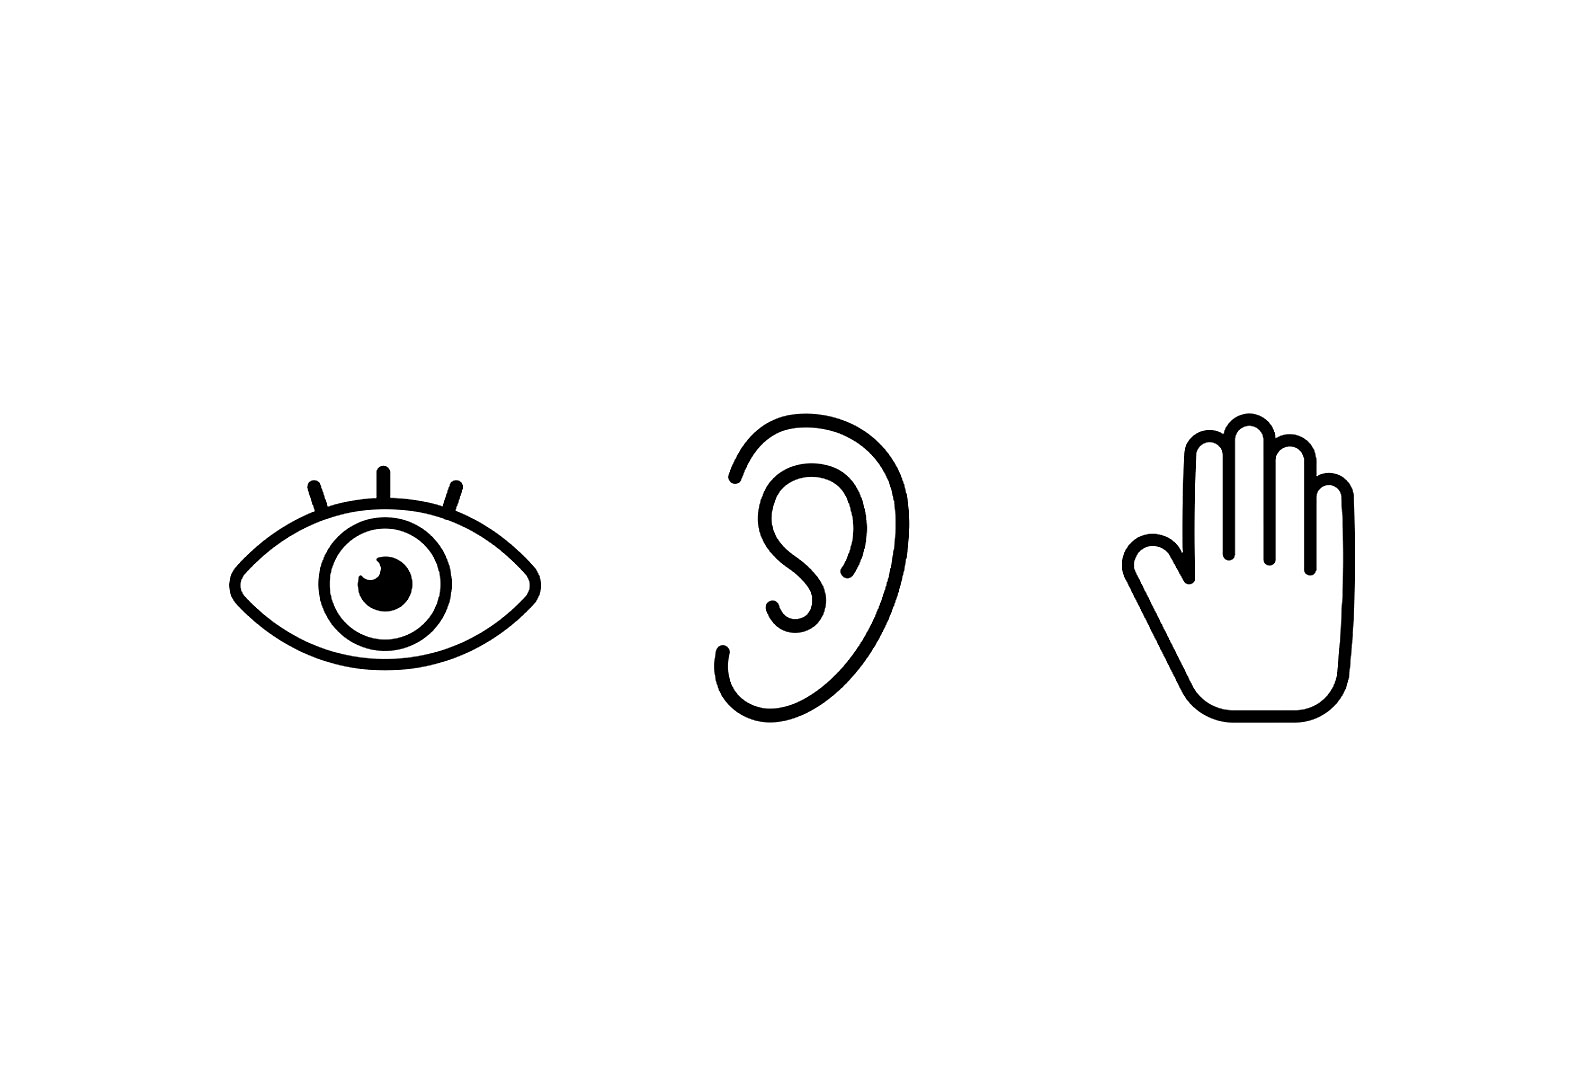 Simple icon images of an eye, an ear and a hand